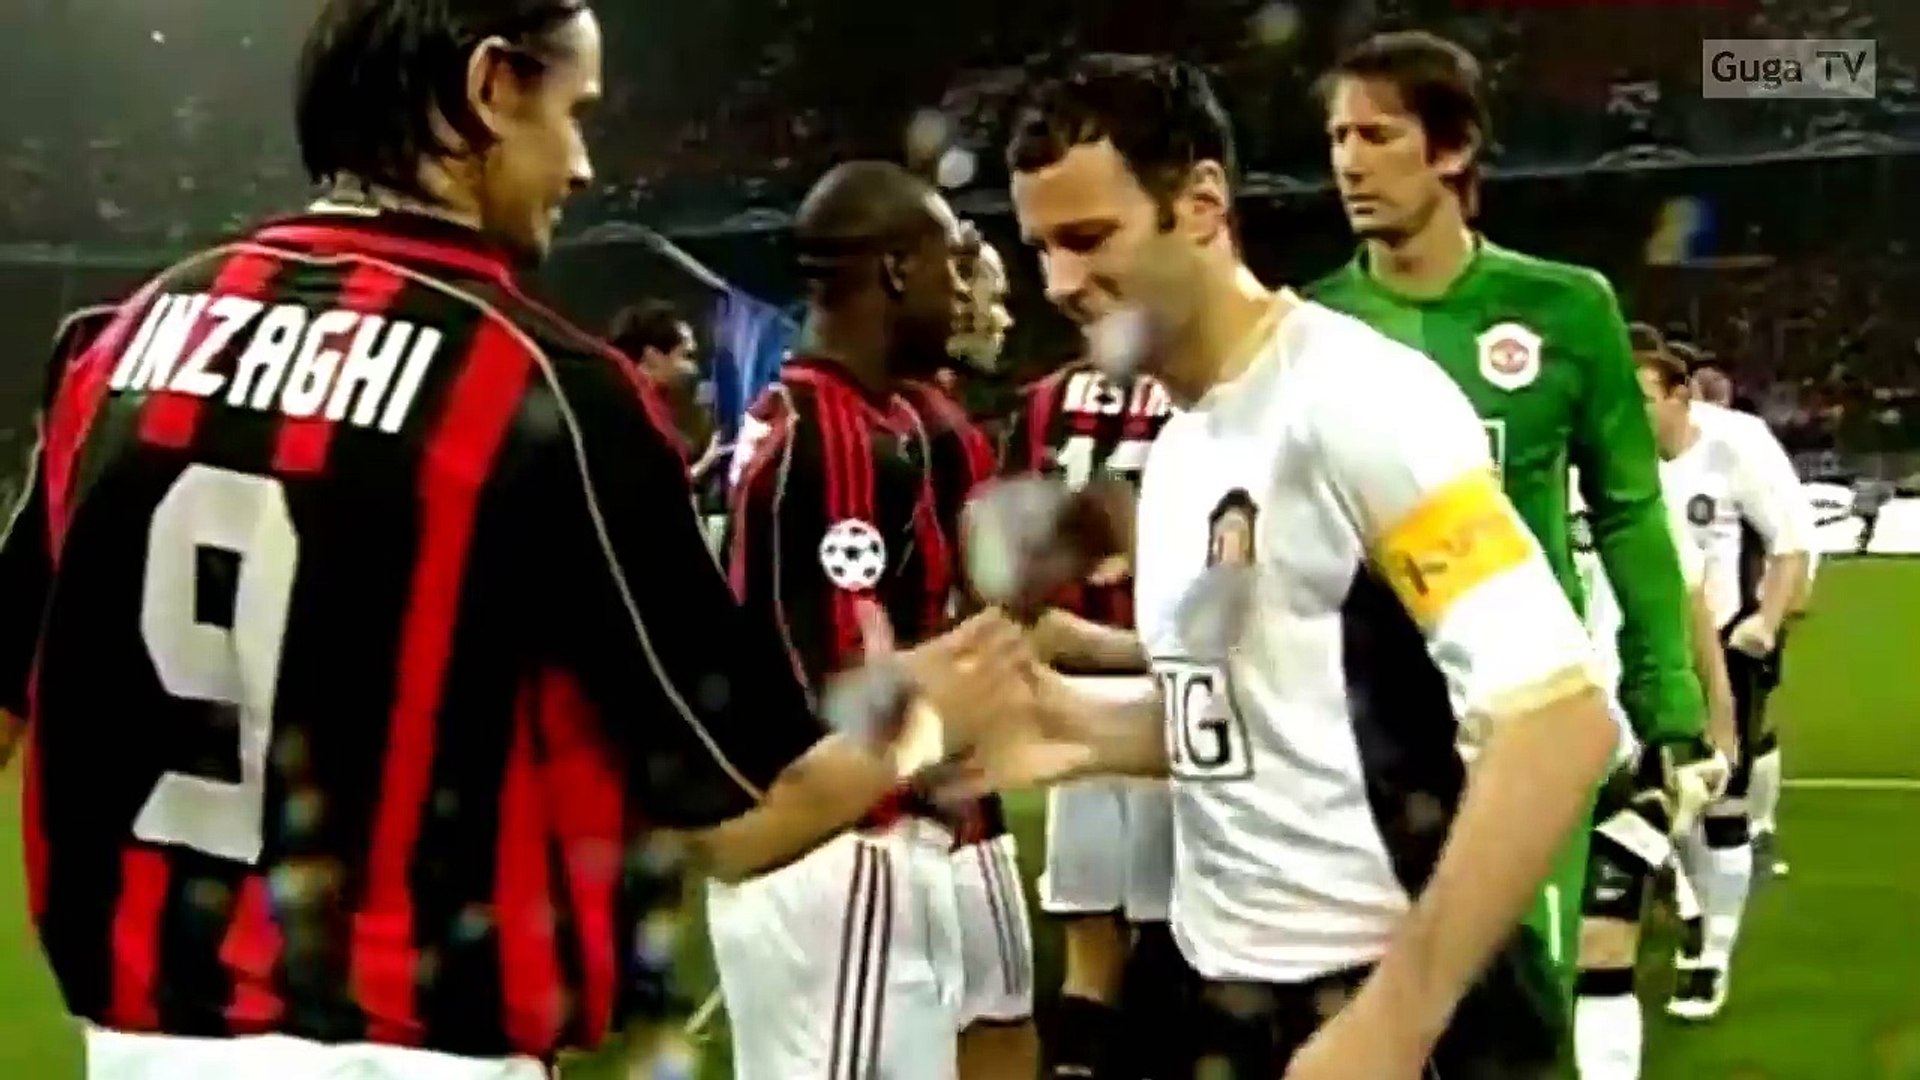 AC Milan vs Manchester United 3-0 - 2007 - Highlights (English Commetnary)  - video Dailymotion